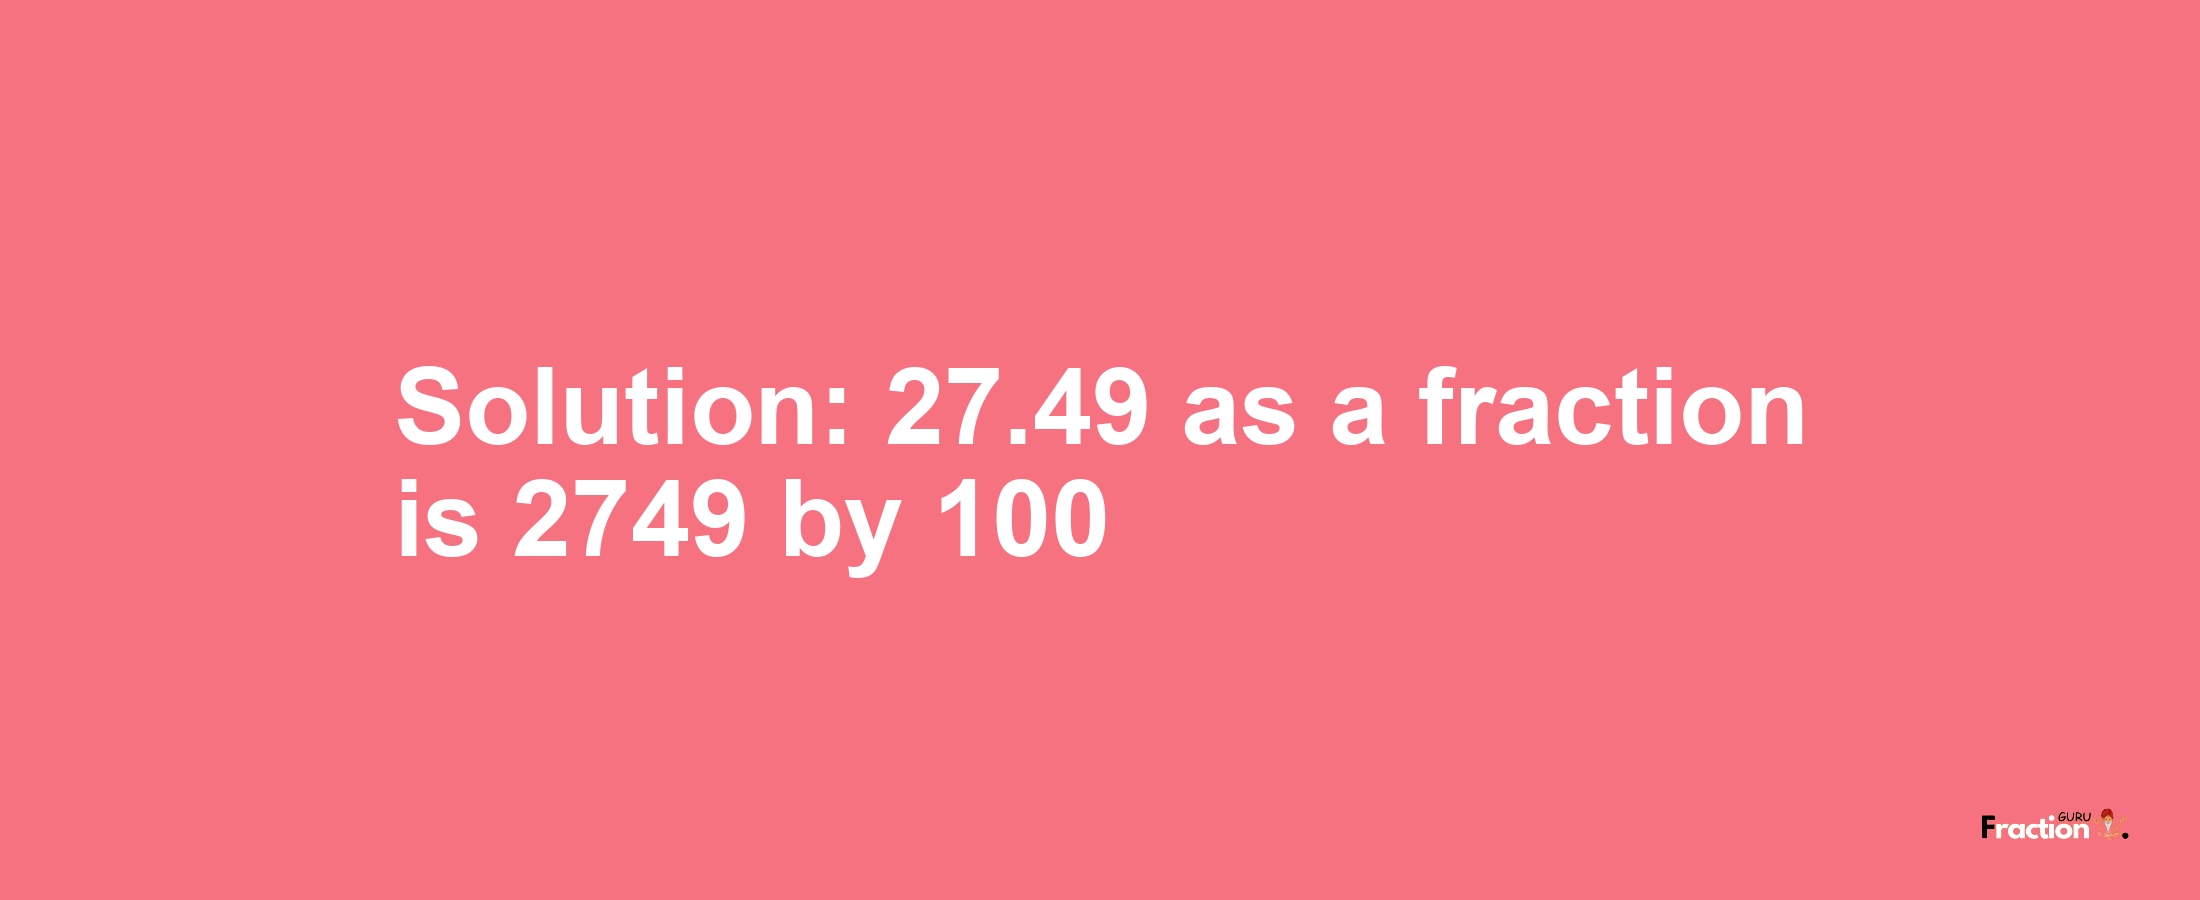 Solution:27.49 as a fraction is 2749/100